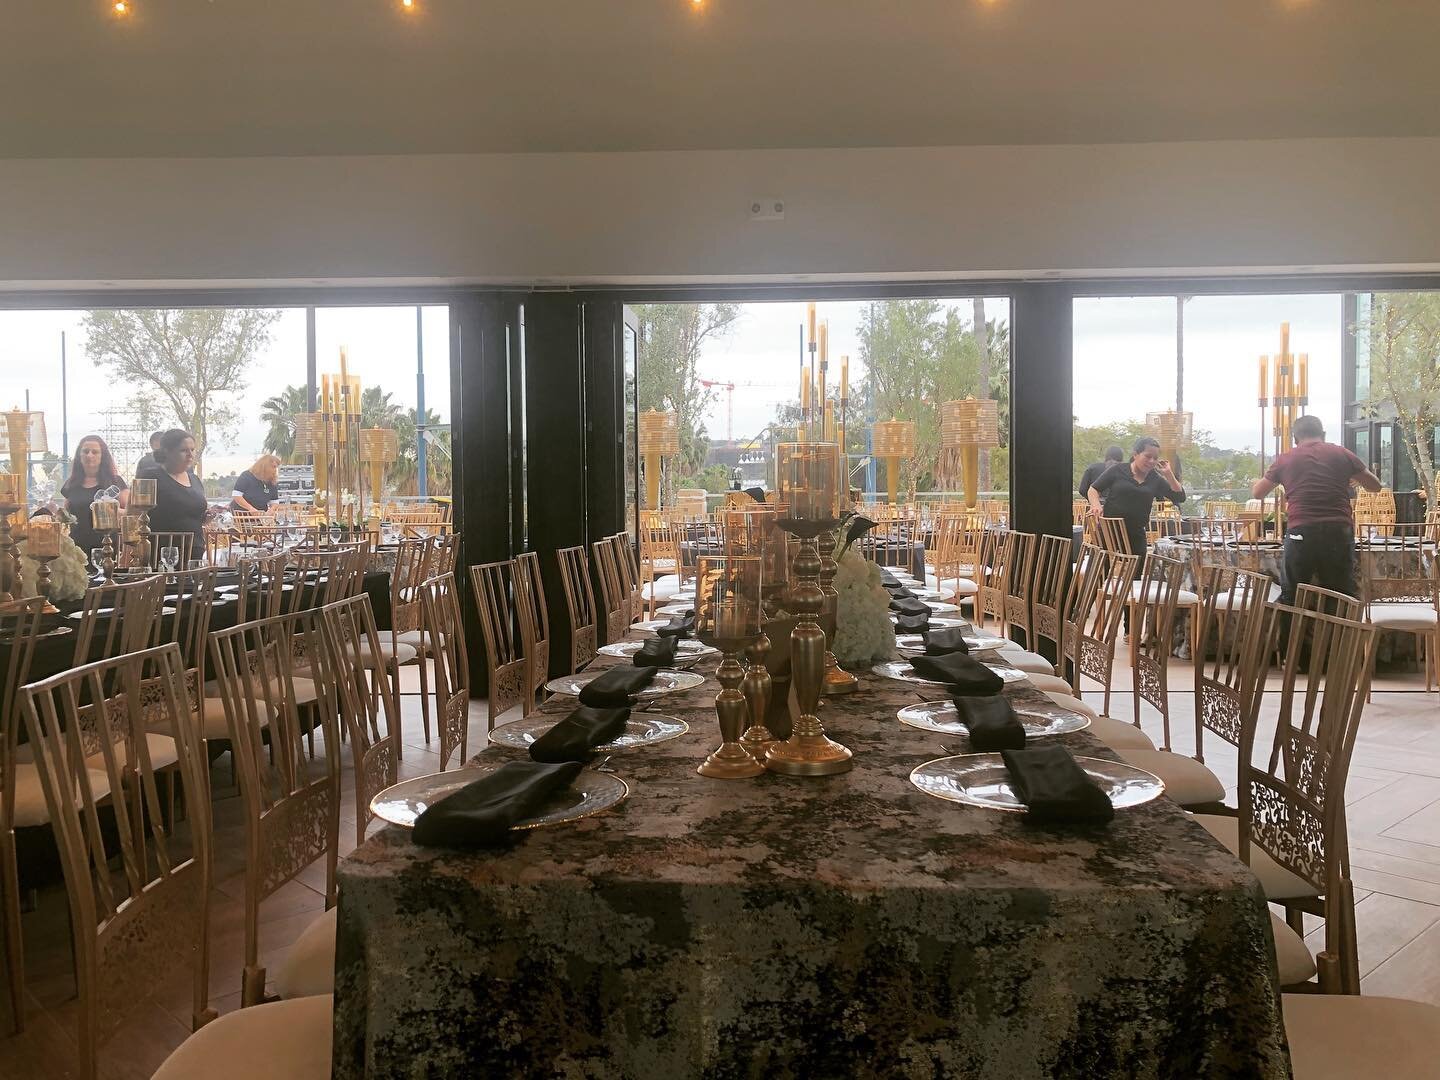 Our first event, a charity gala for 350 people, Luckily just before Covid Hit.... feeling really grateful the inside ballroom is covered by accordian doors that connect 40% of the wall space inside to the outdoor roof deck.... now booking for 2021! #